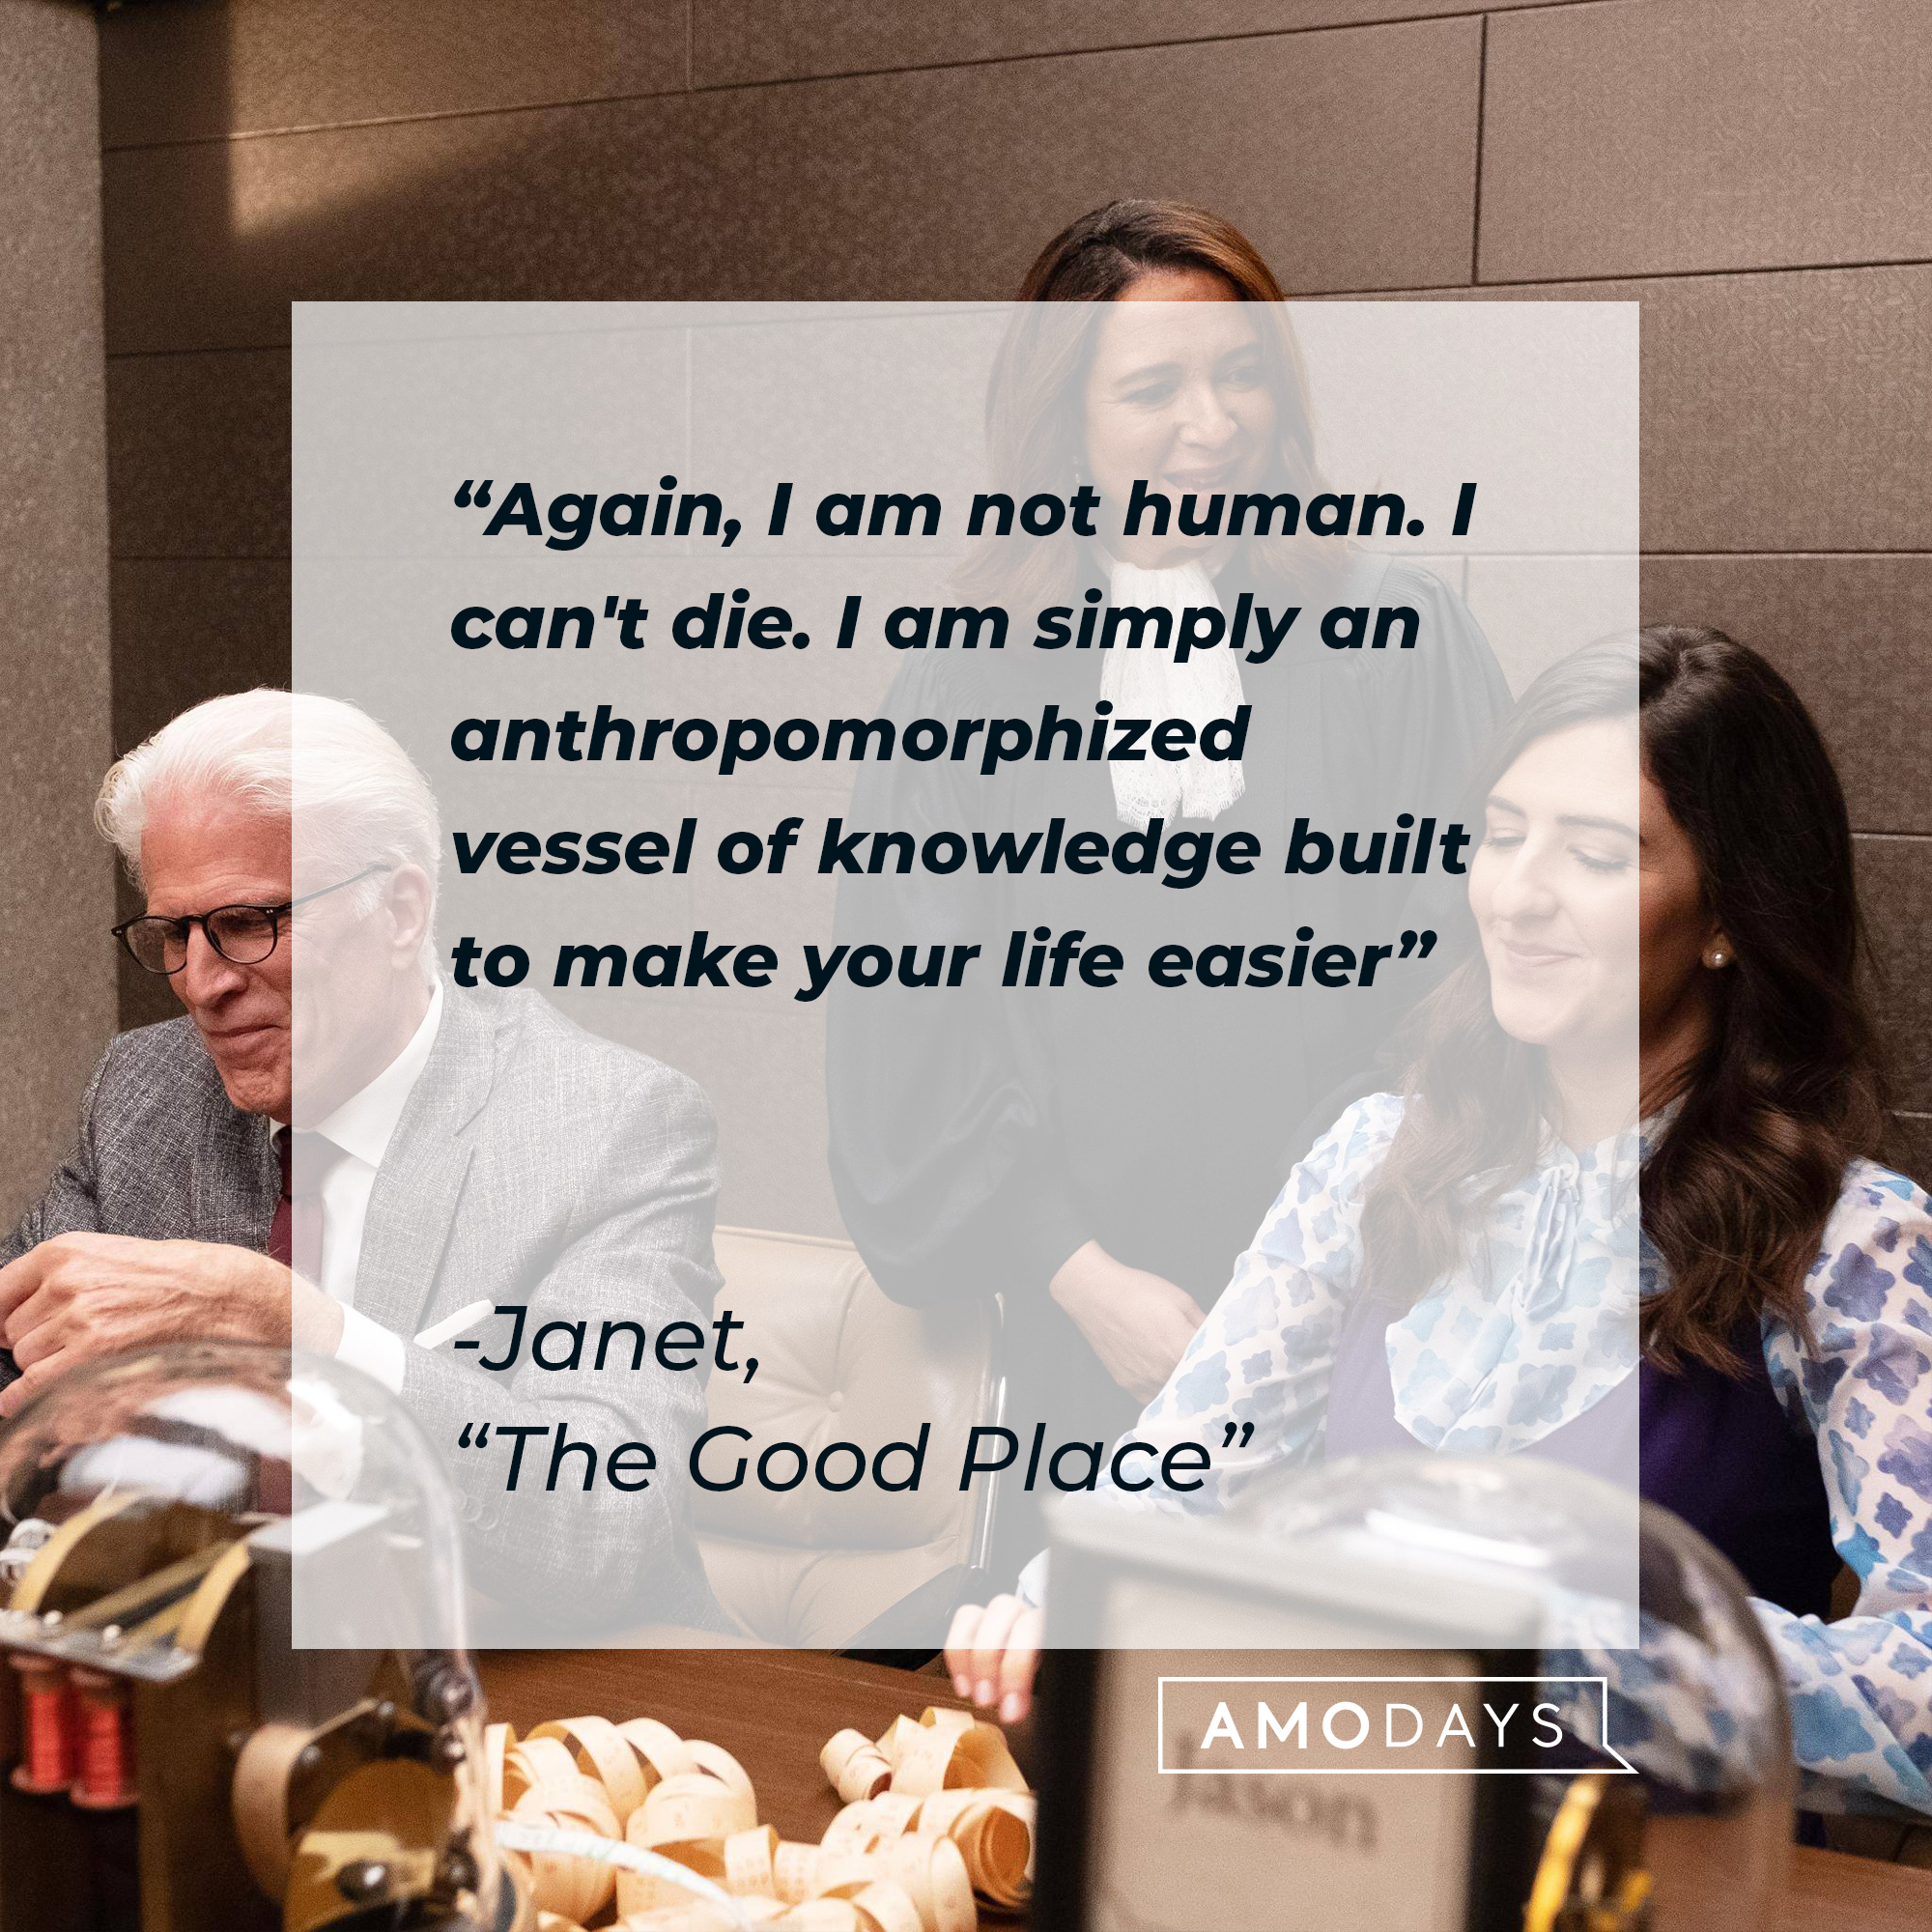 Janet's quote: "Again, I am not human. I can't die. I am simply an anthropomorphized vessel of knowledge built to make your life easier" | Source: facebook.com/NBCTheGoodPlace